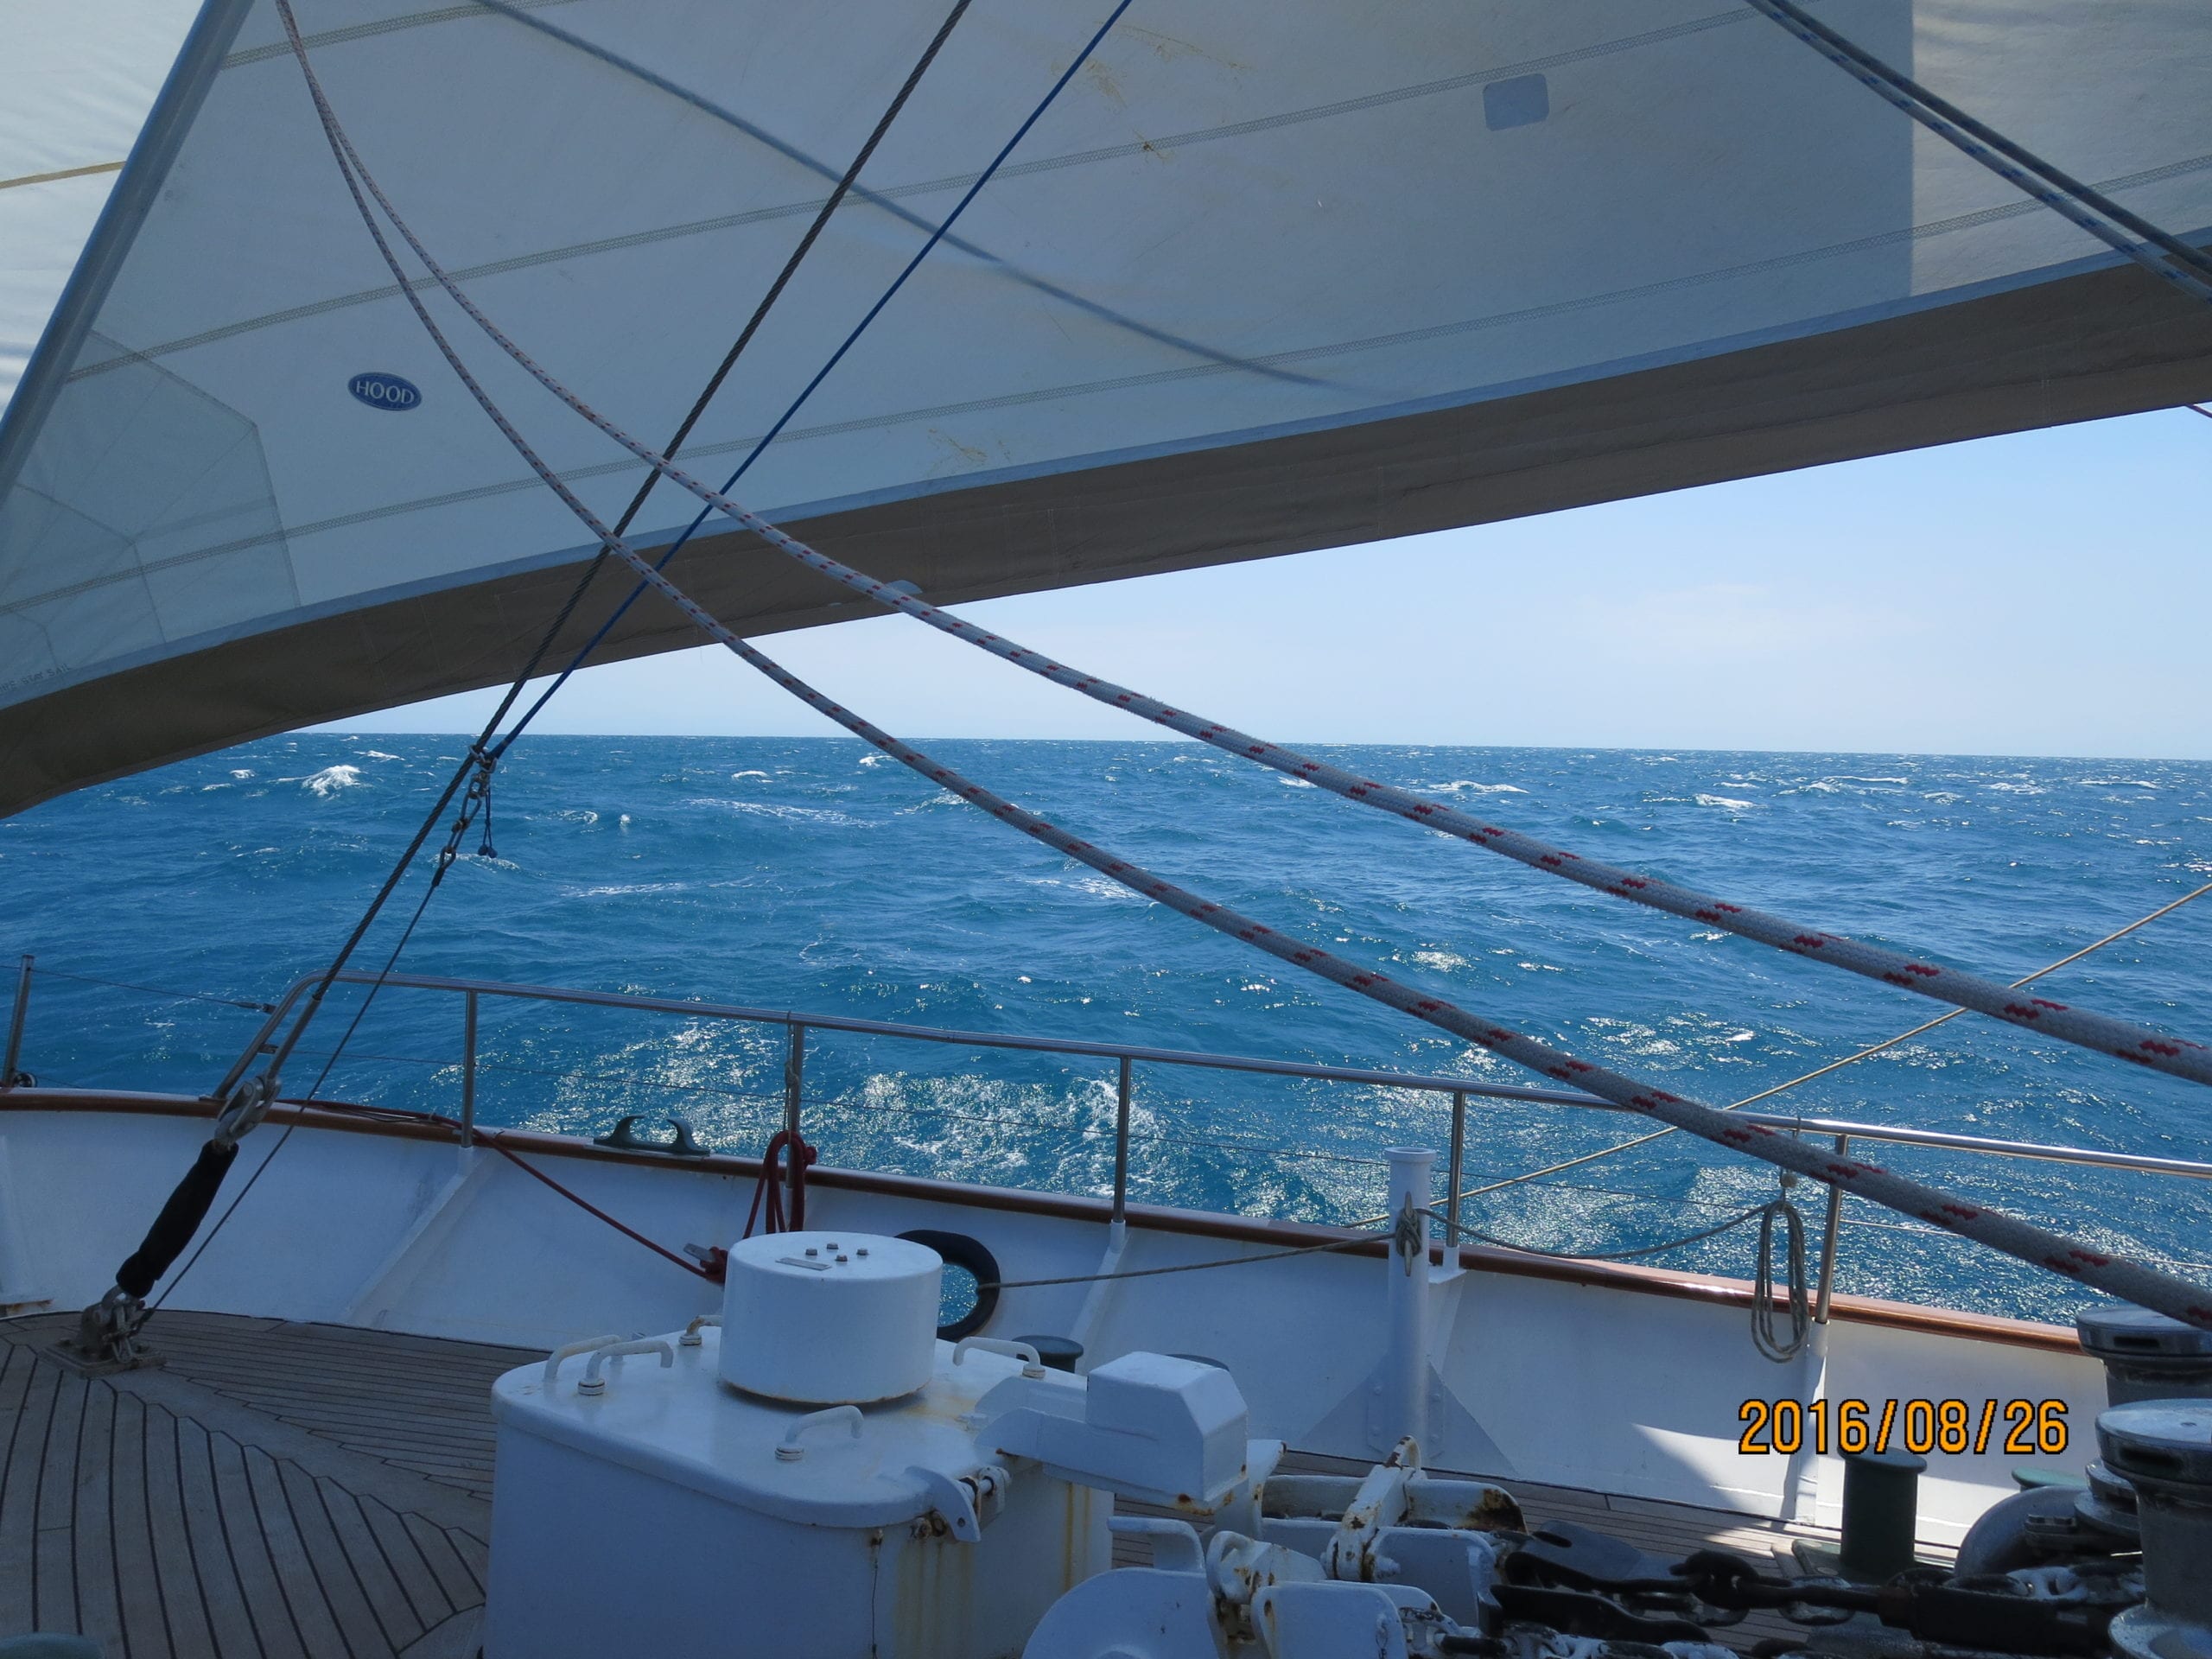 During the 11-day voyage, Issy got the opportunity to climb the mast and also helm the boat.